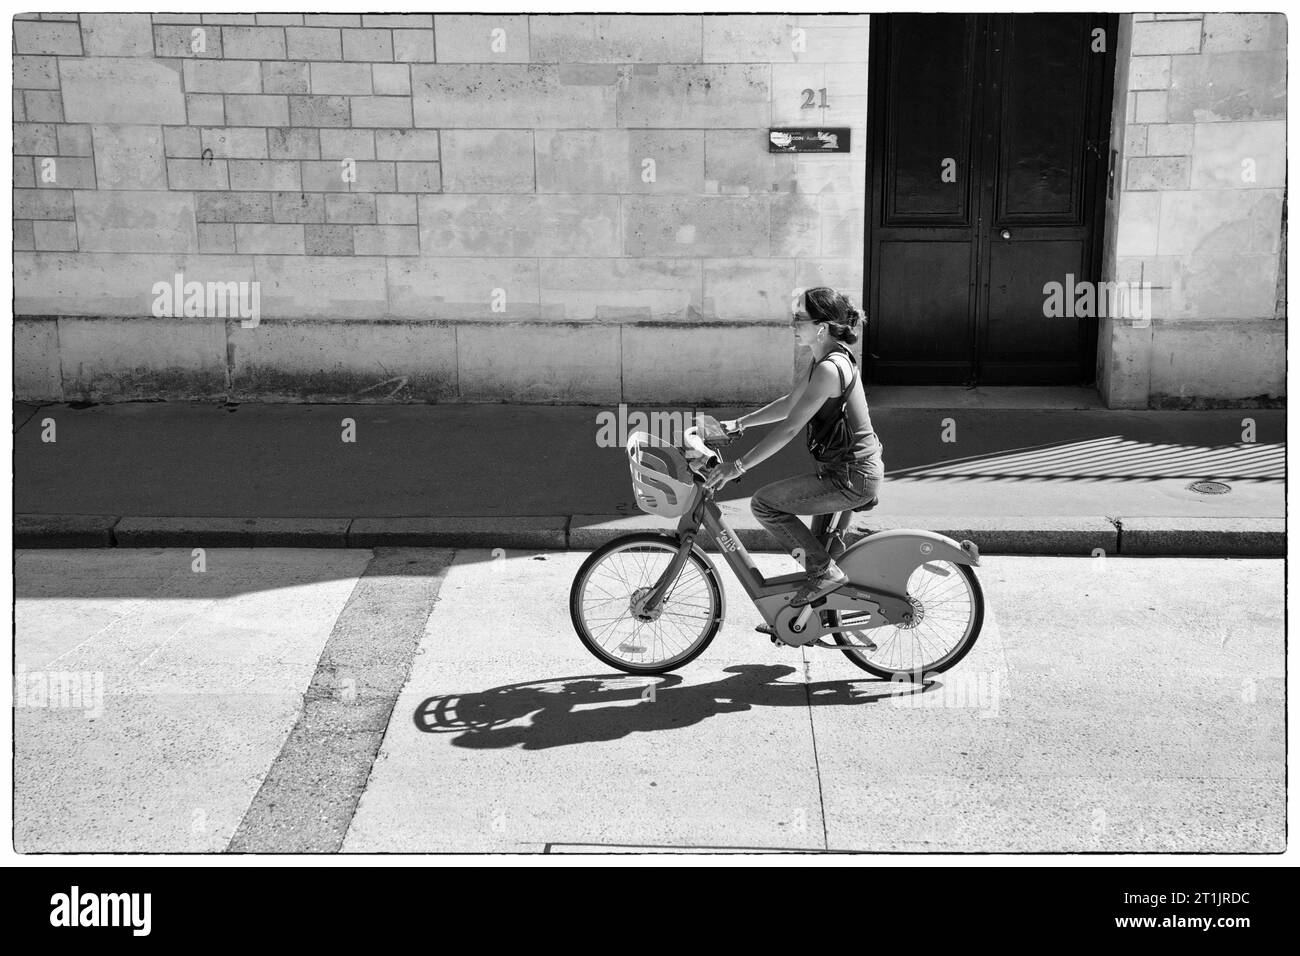 Woman riding her bicycle on the street in St. Germain, Paris France Stock Photo